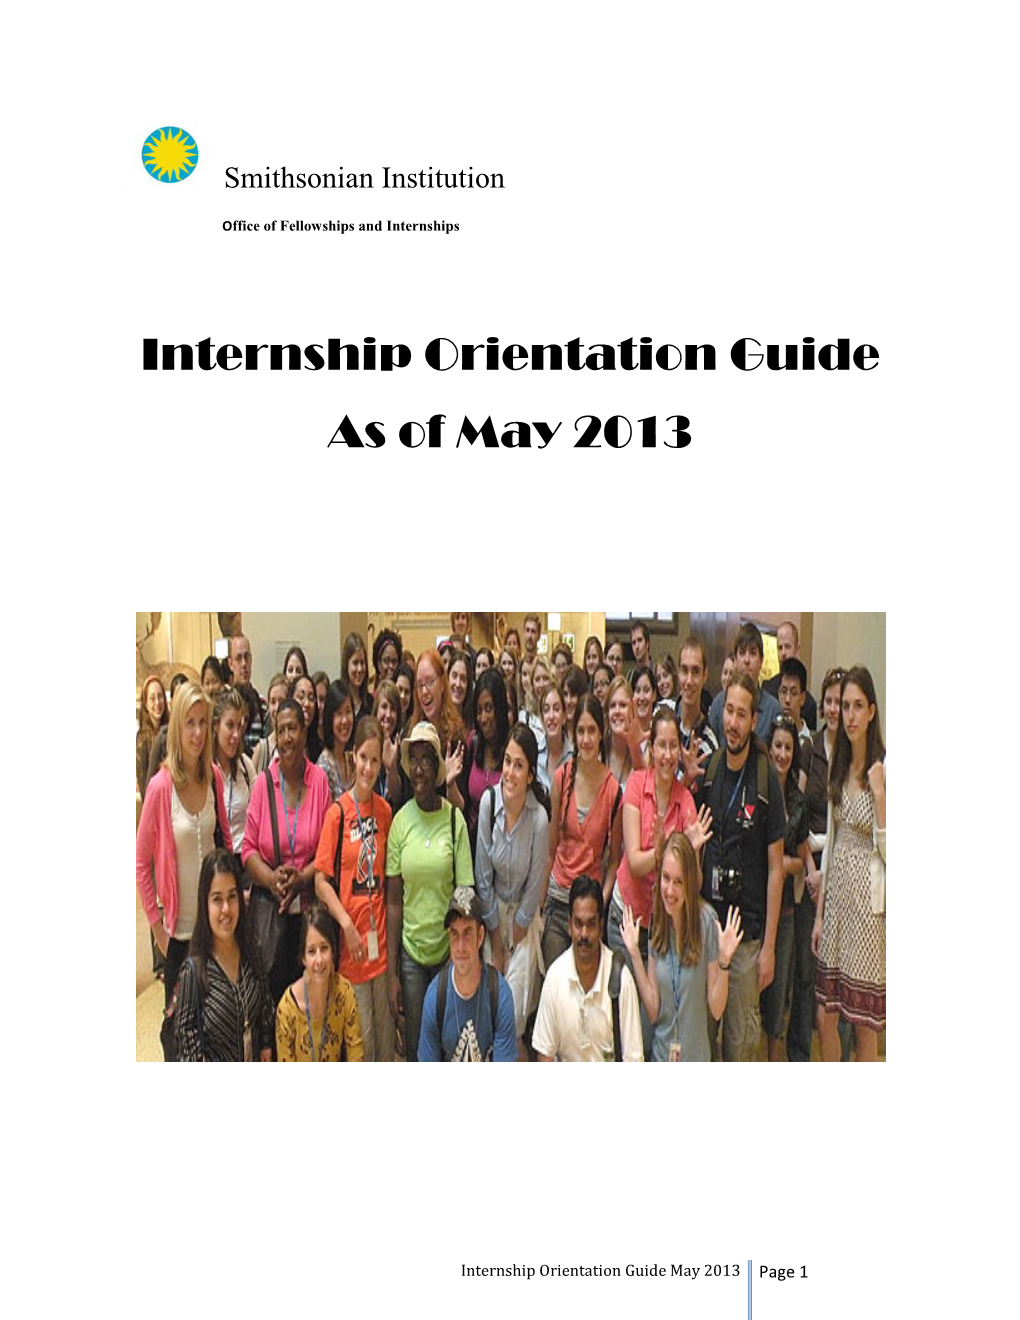 Internship Orientation Guide As of May 2013